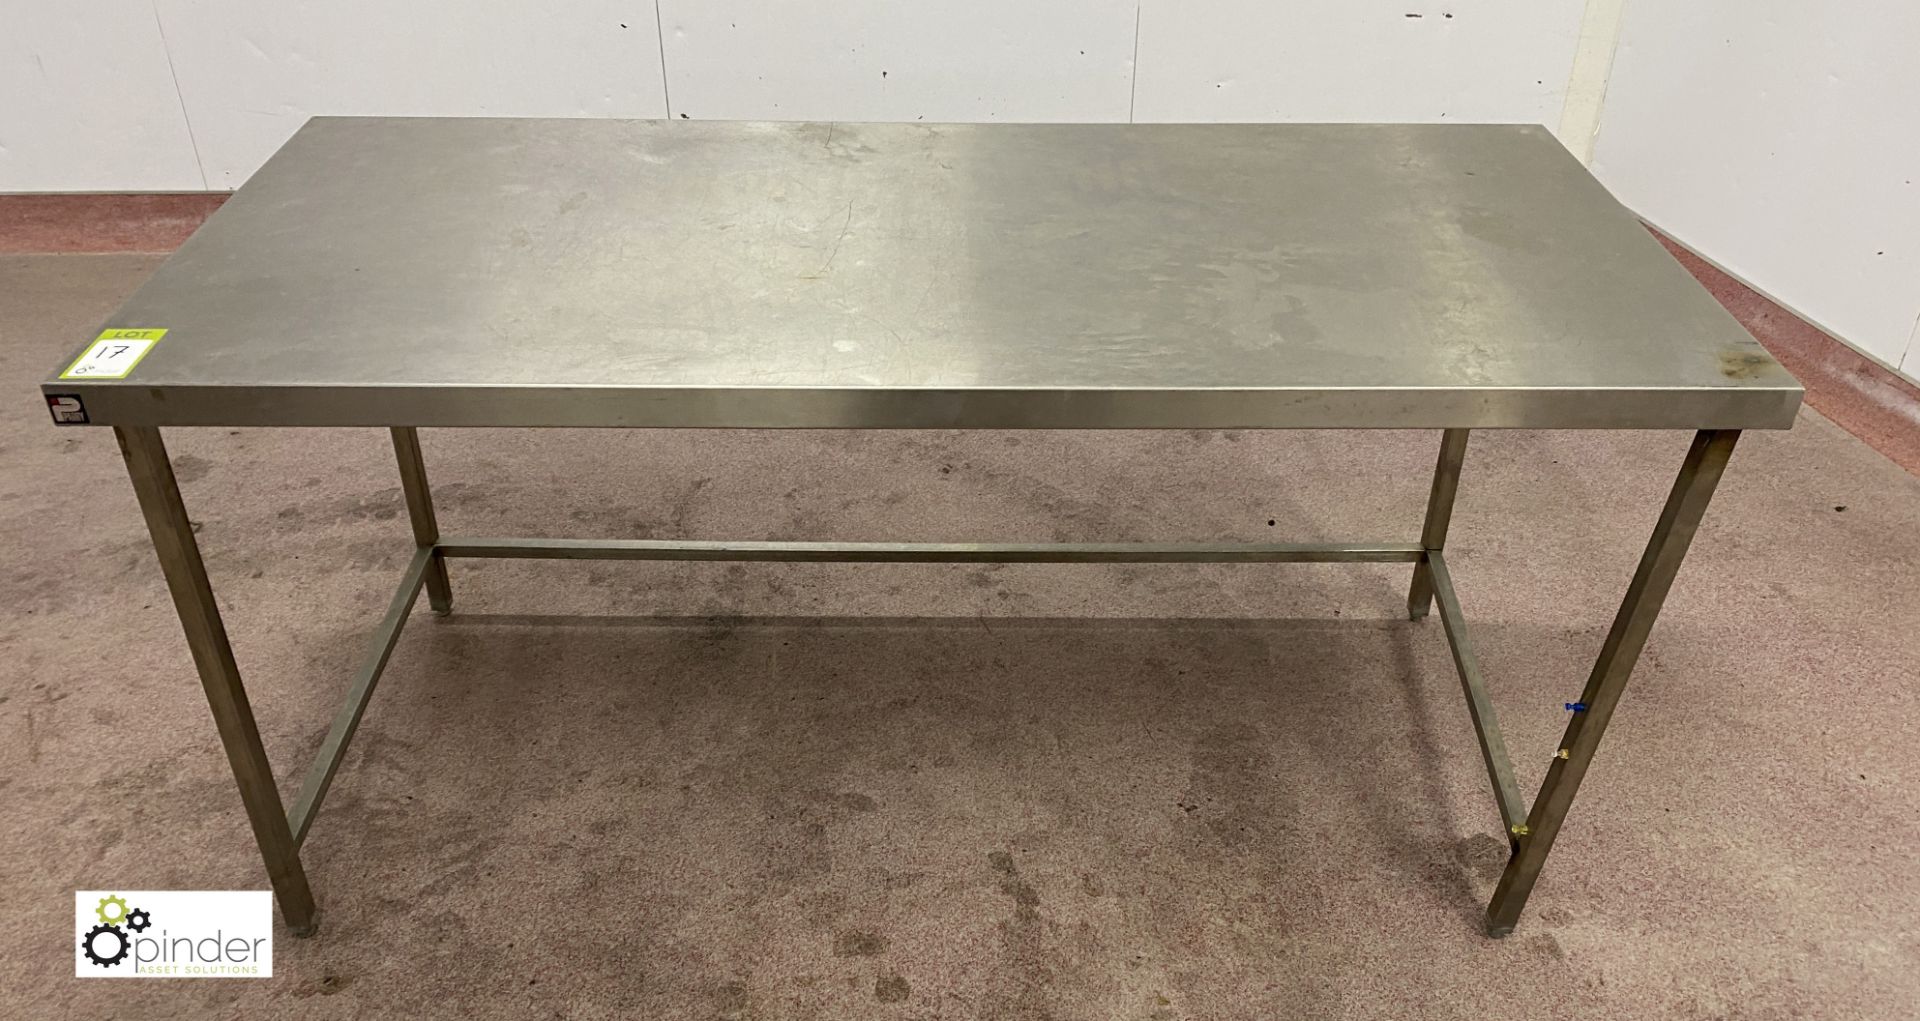 Parry stainless steel Preparation Table, 1790mm x 795mm x 880mm (please note there is a lift out fee - Image 2 of 4